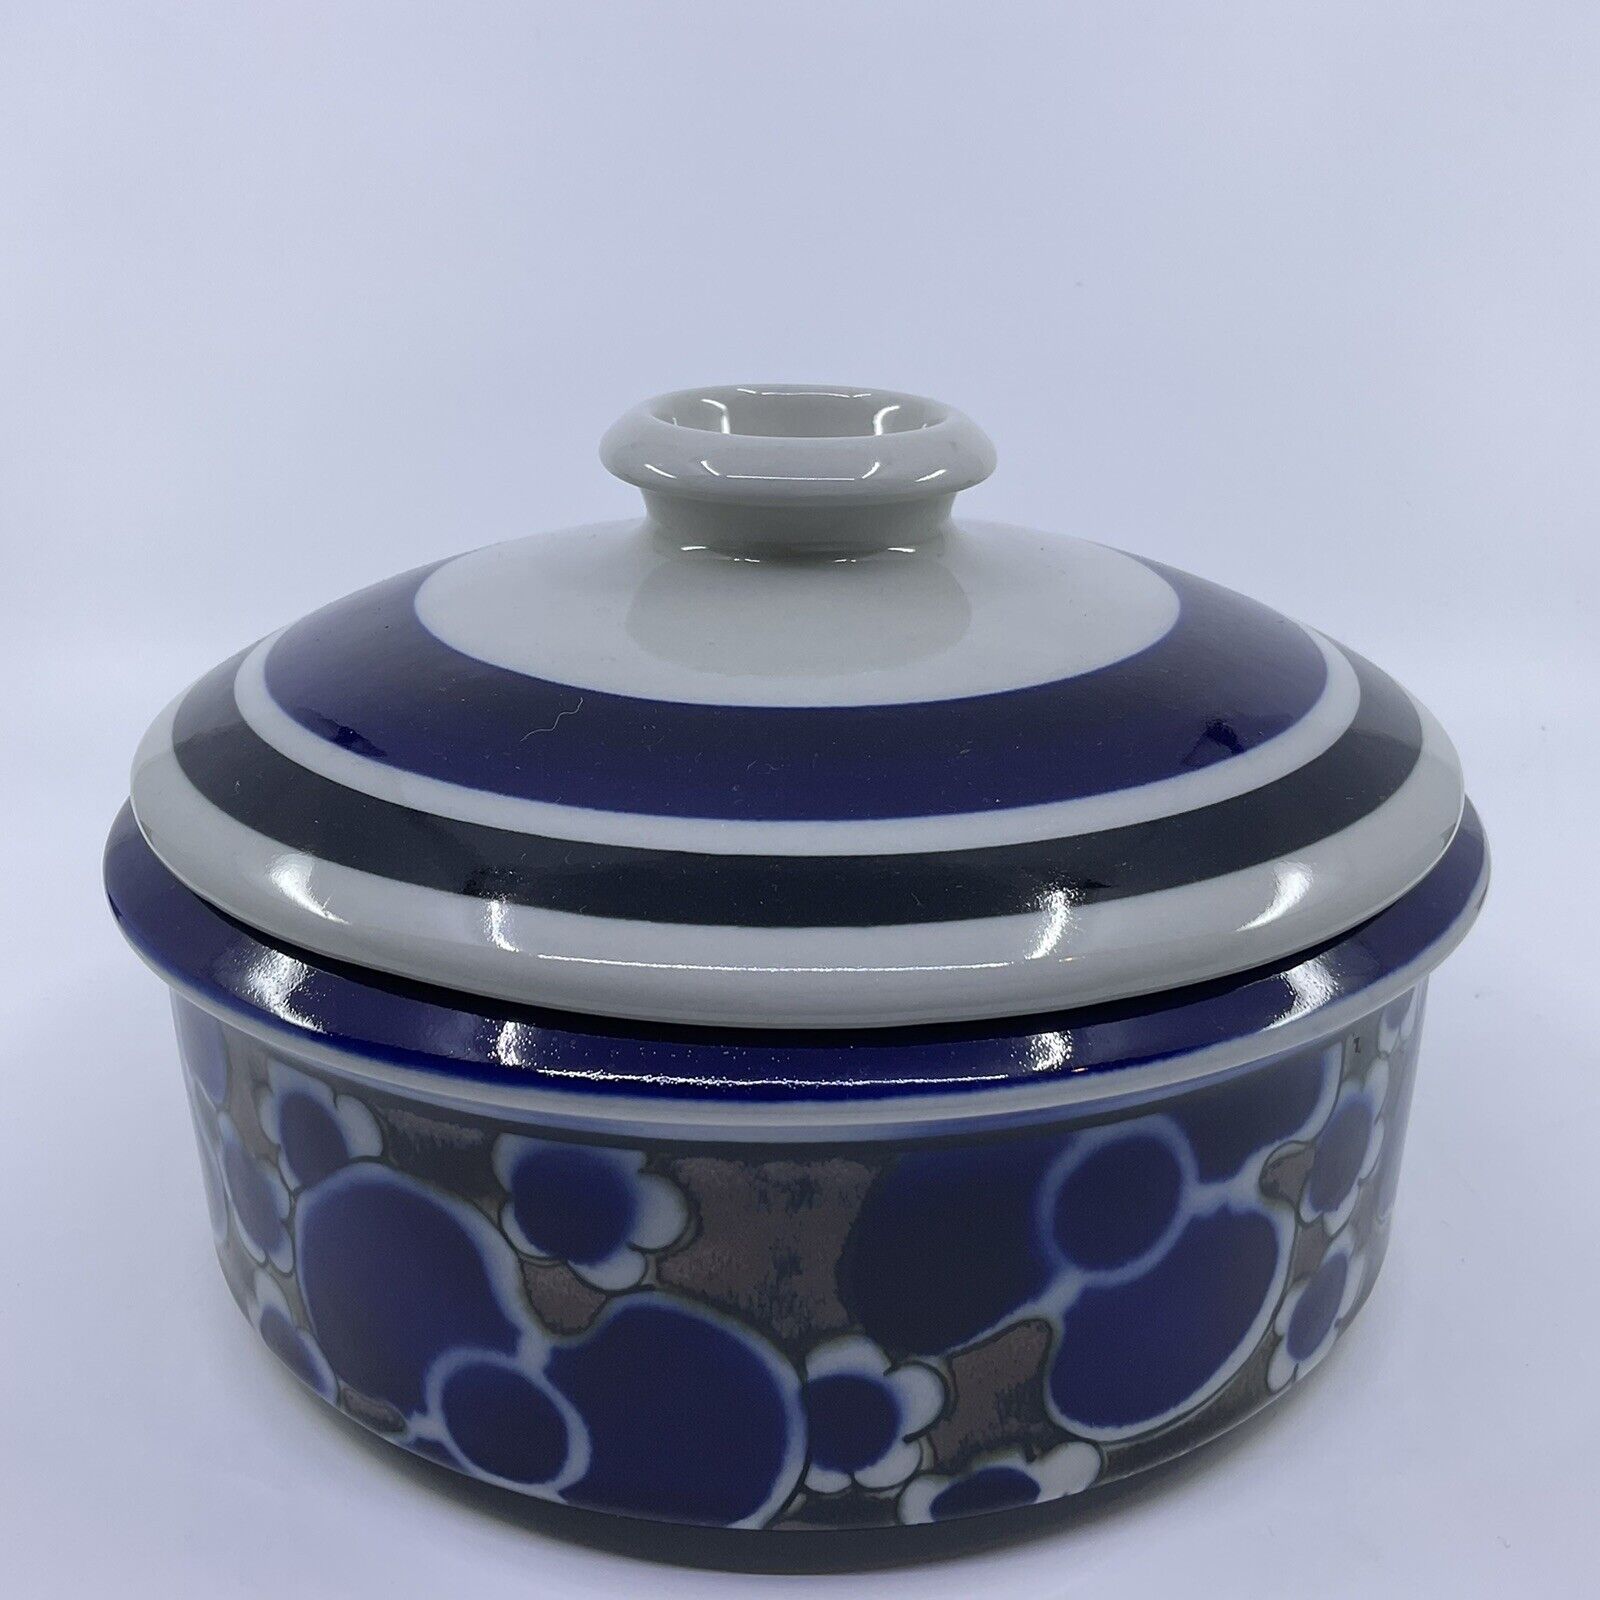 Read more about the article Arabia Saara Large Covered Casserole